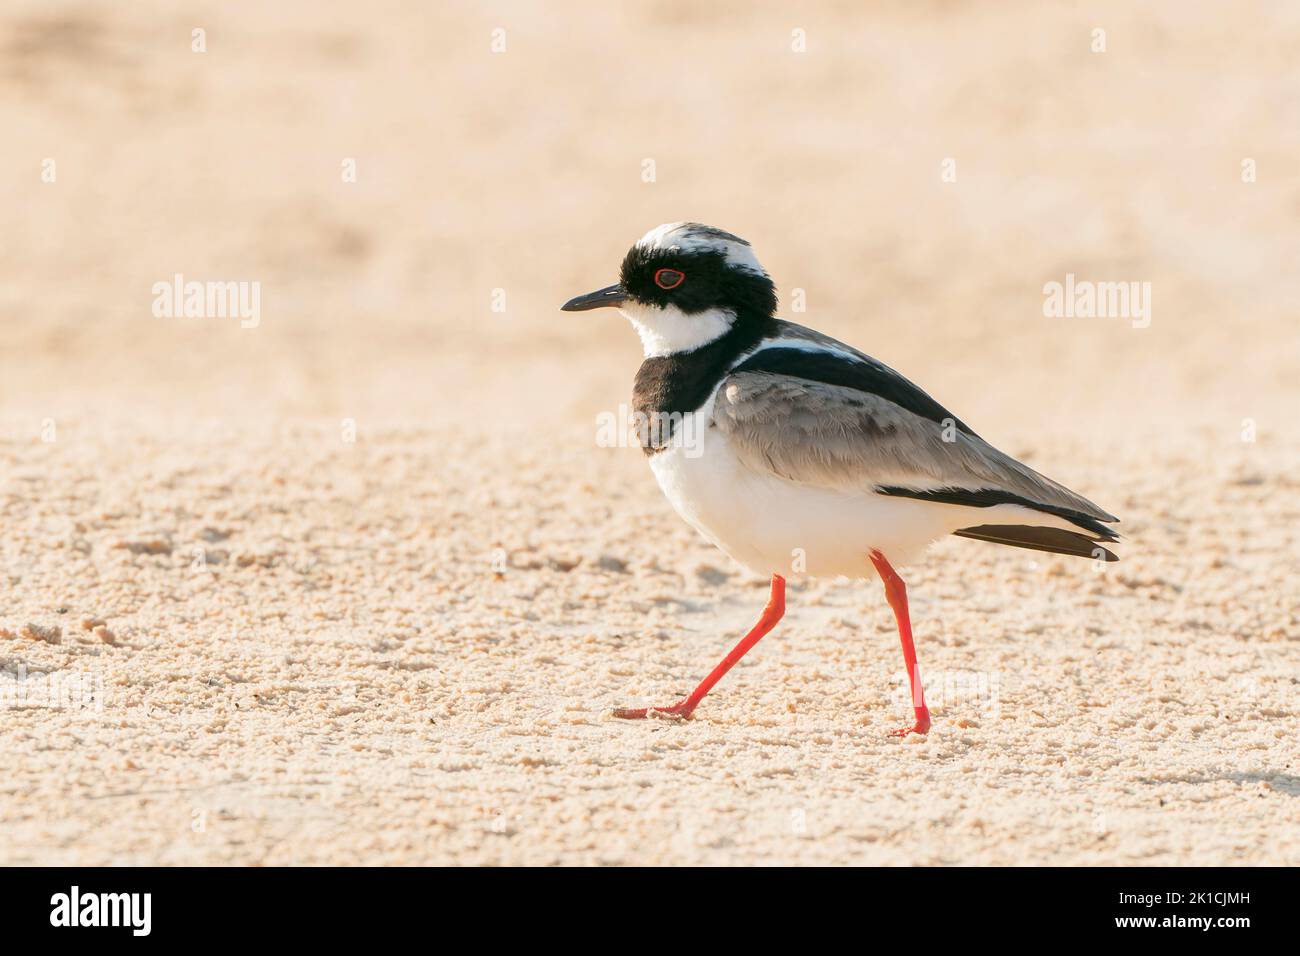 pied lapwing or pied plover, Vanellus cayanus, single adult walking on sandy beach, Pantanal, Brazil Stock Photo